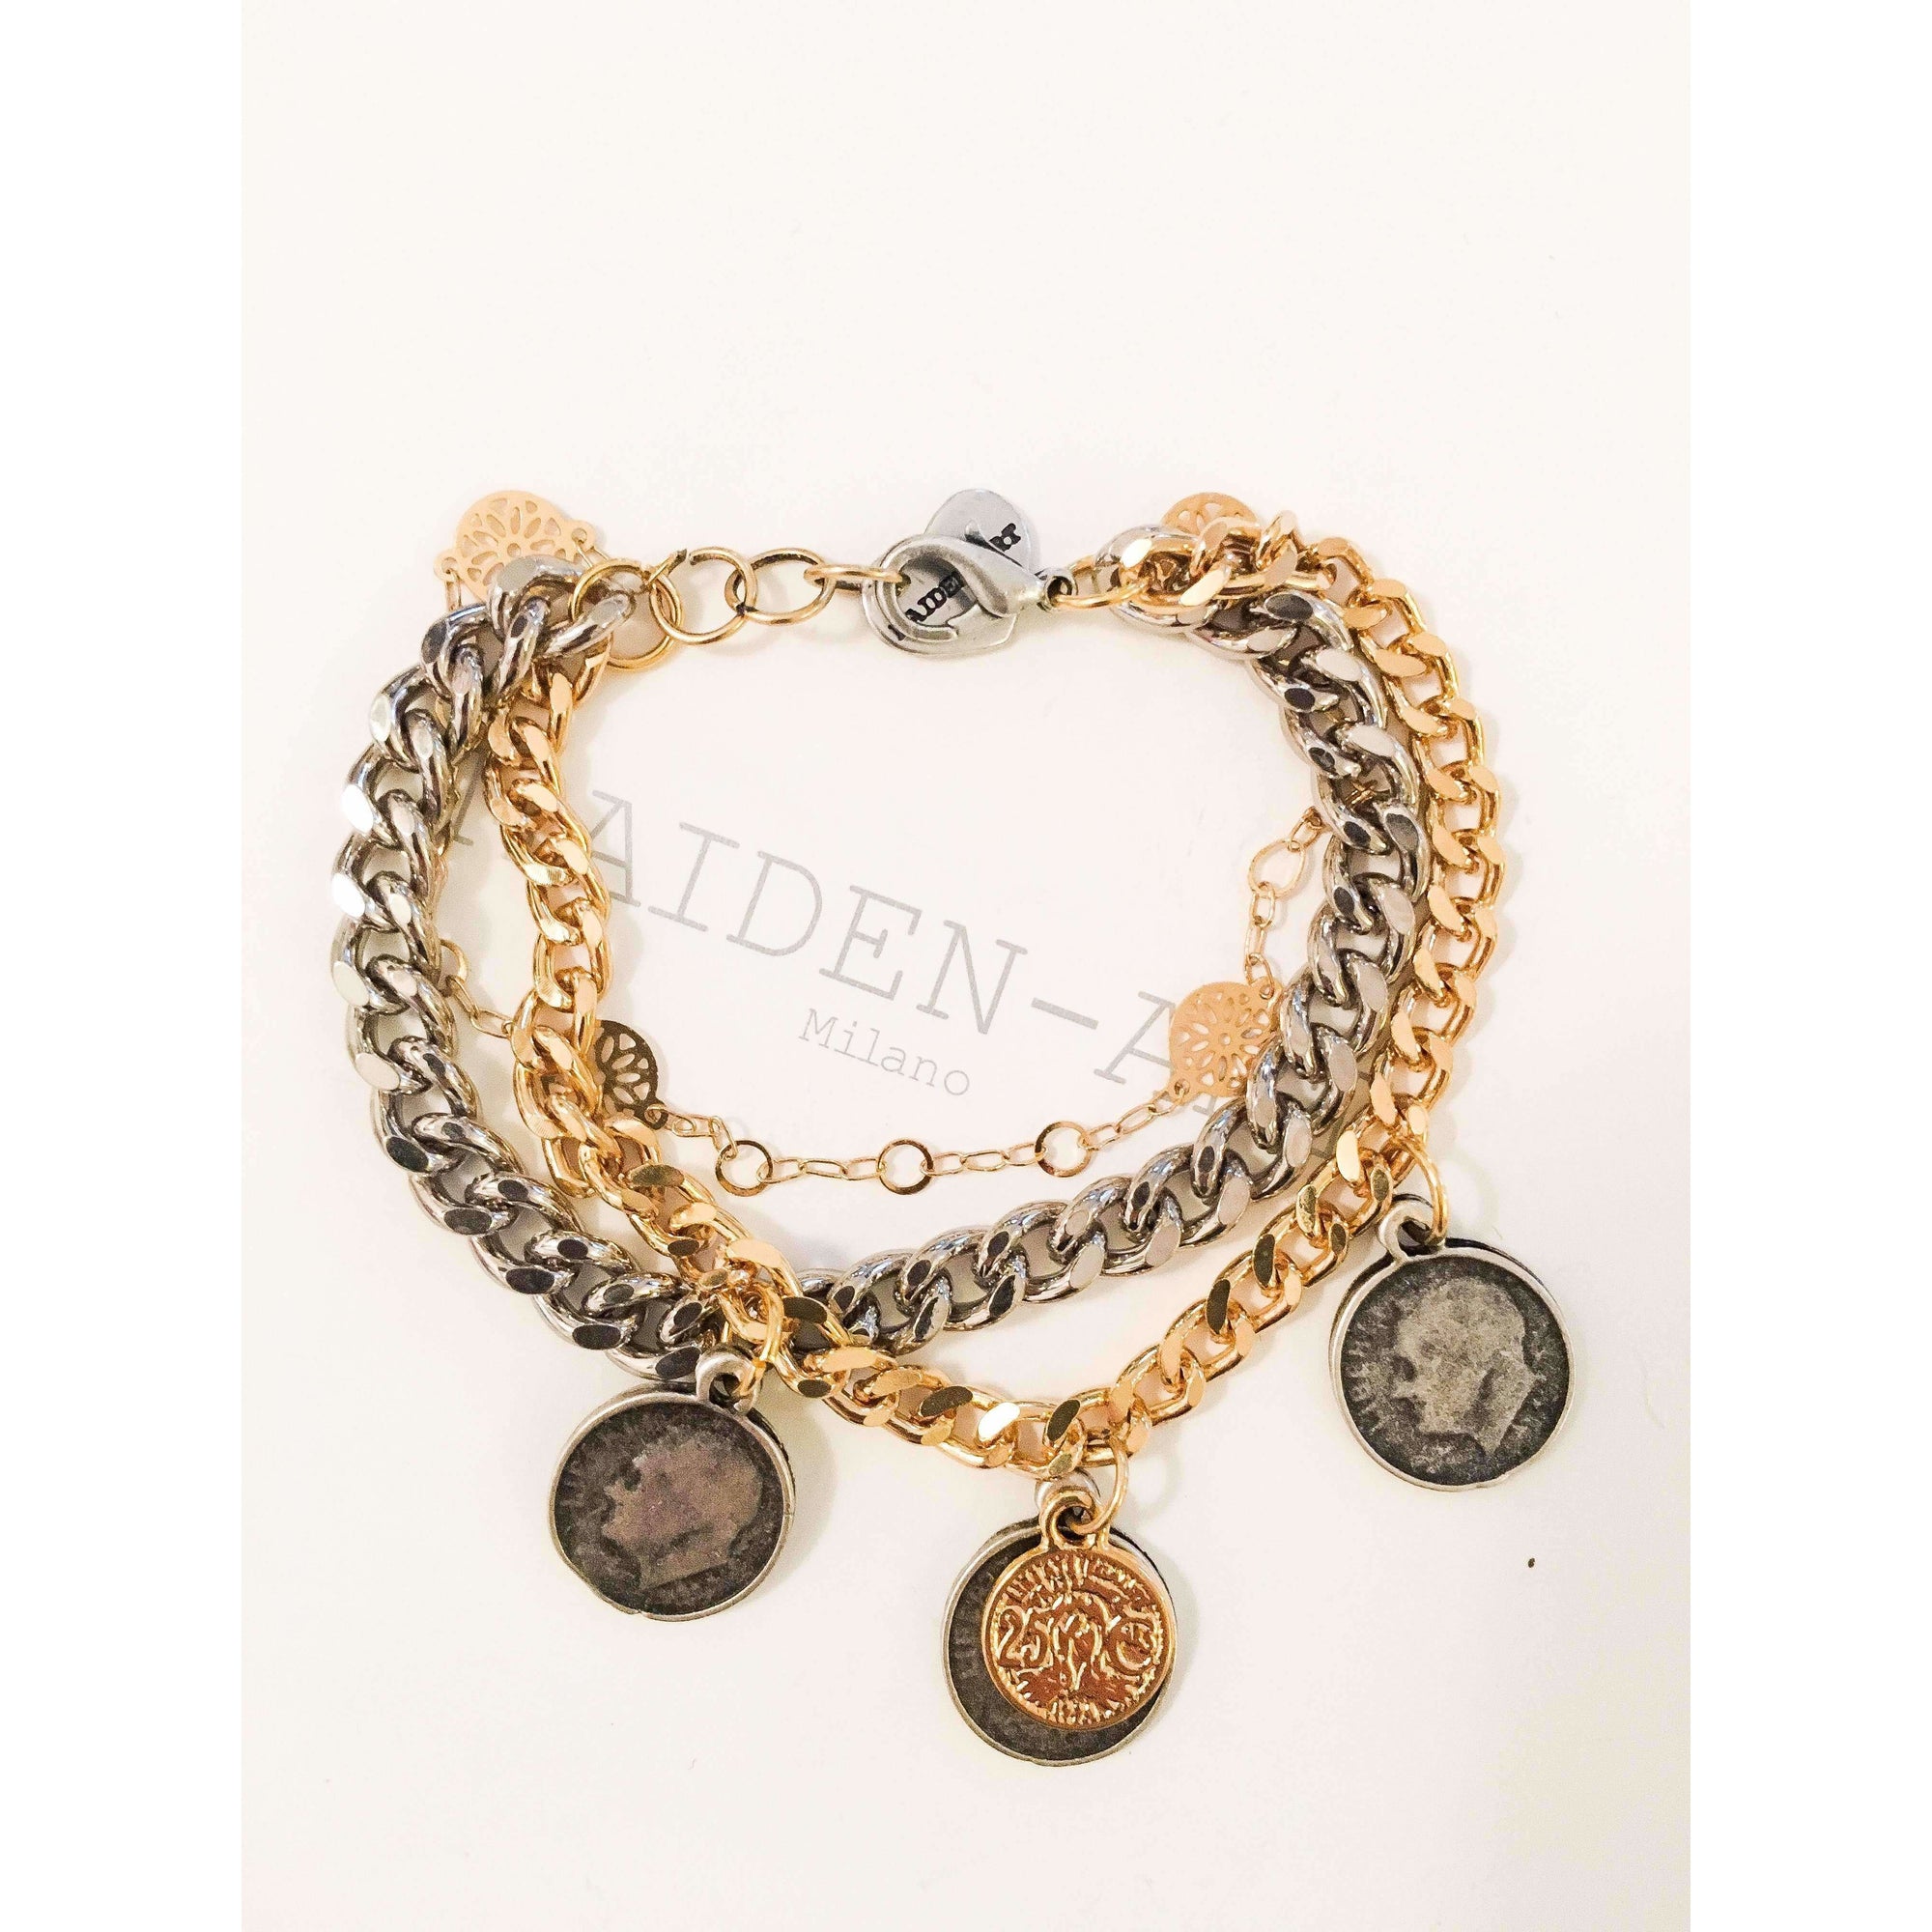 Coin Layered Bracelet in Gold and Silver. Coin Jewelry.